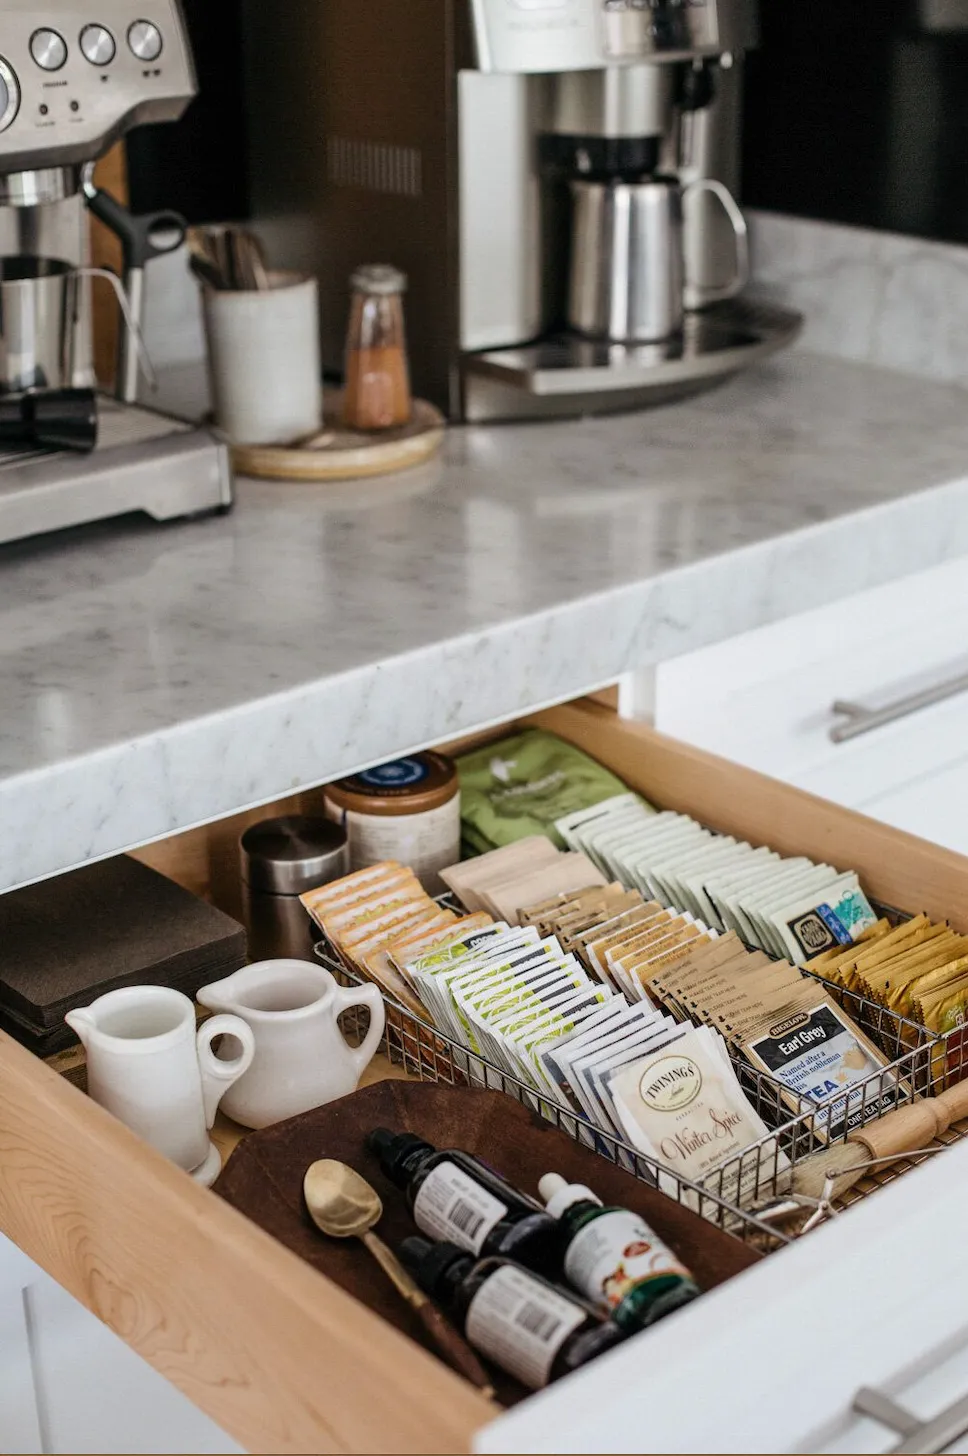 How to make the ultimate at-home coffee station - Your Home Style